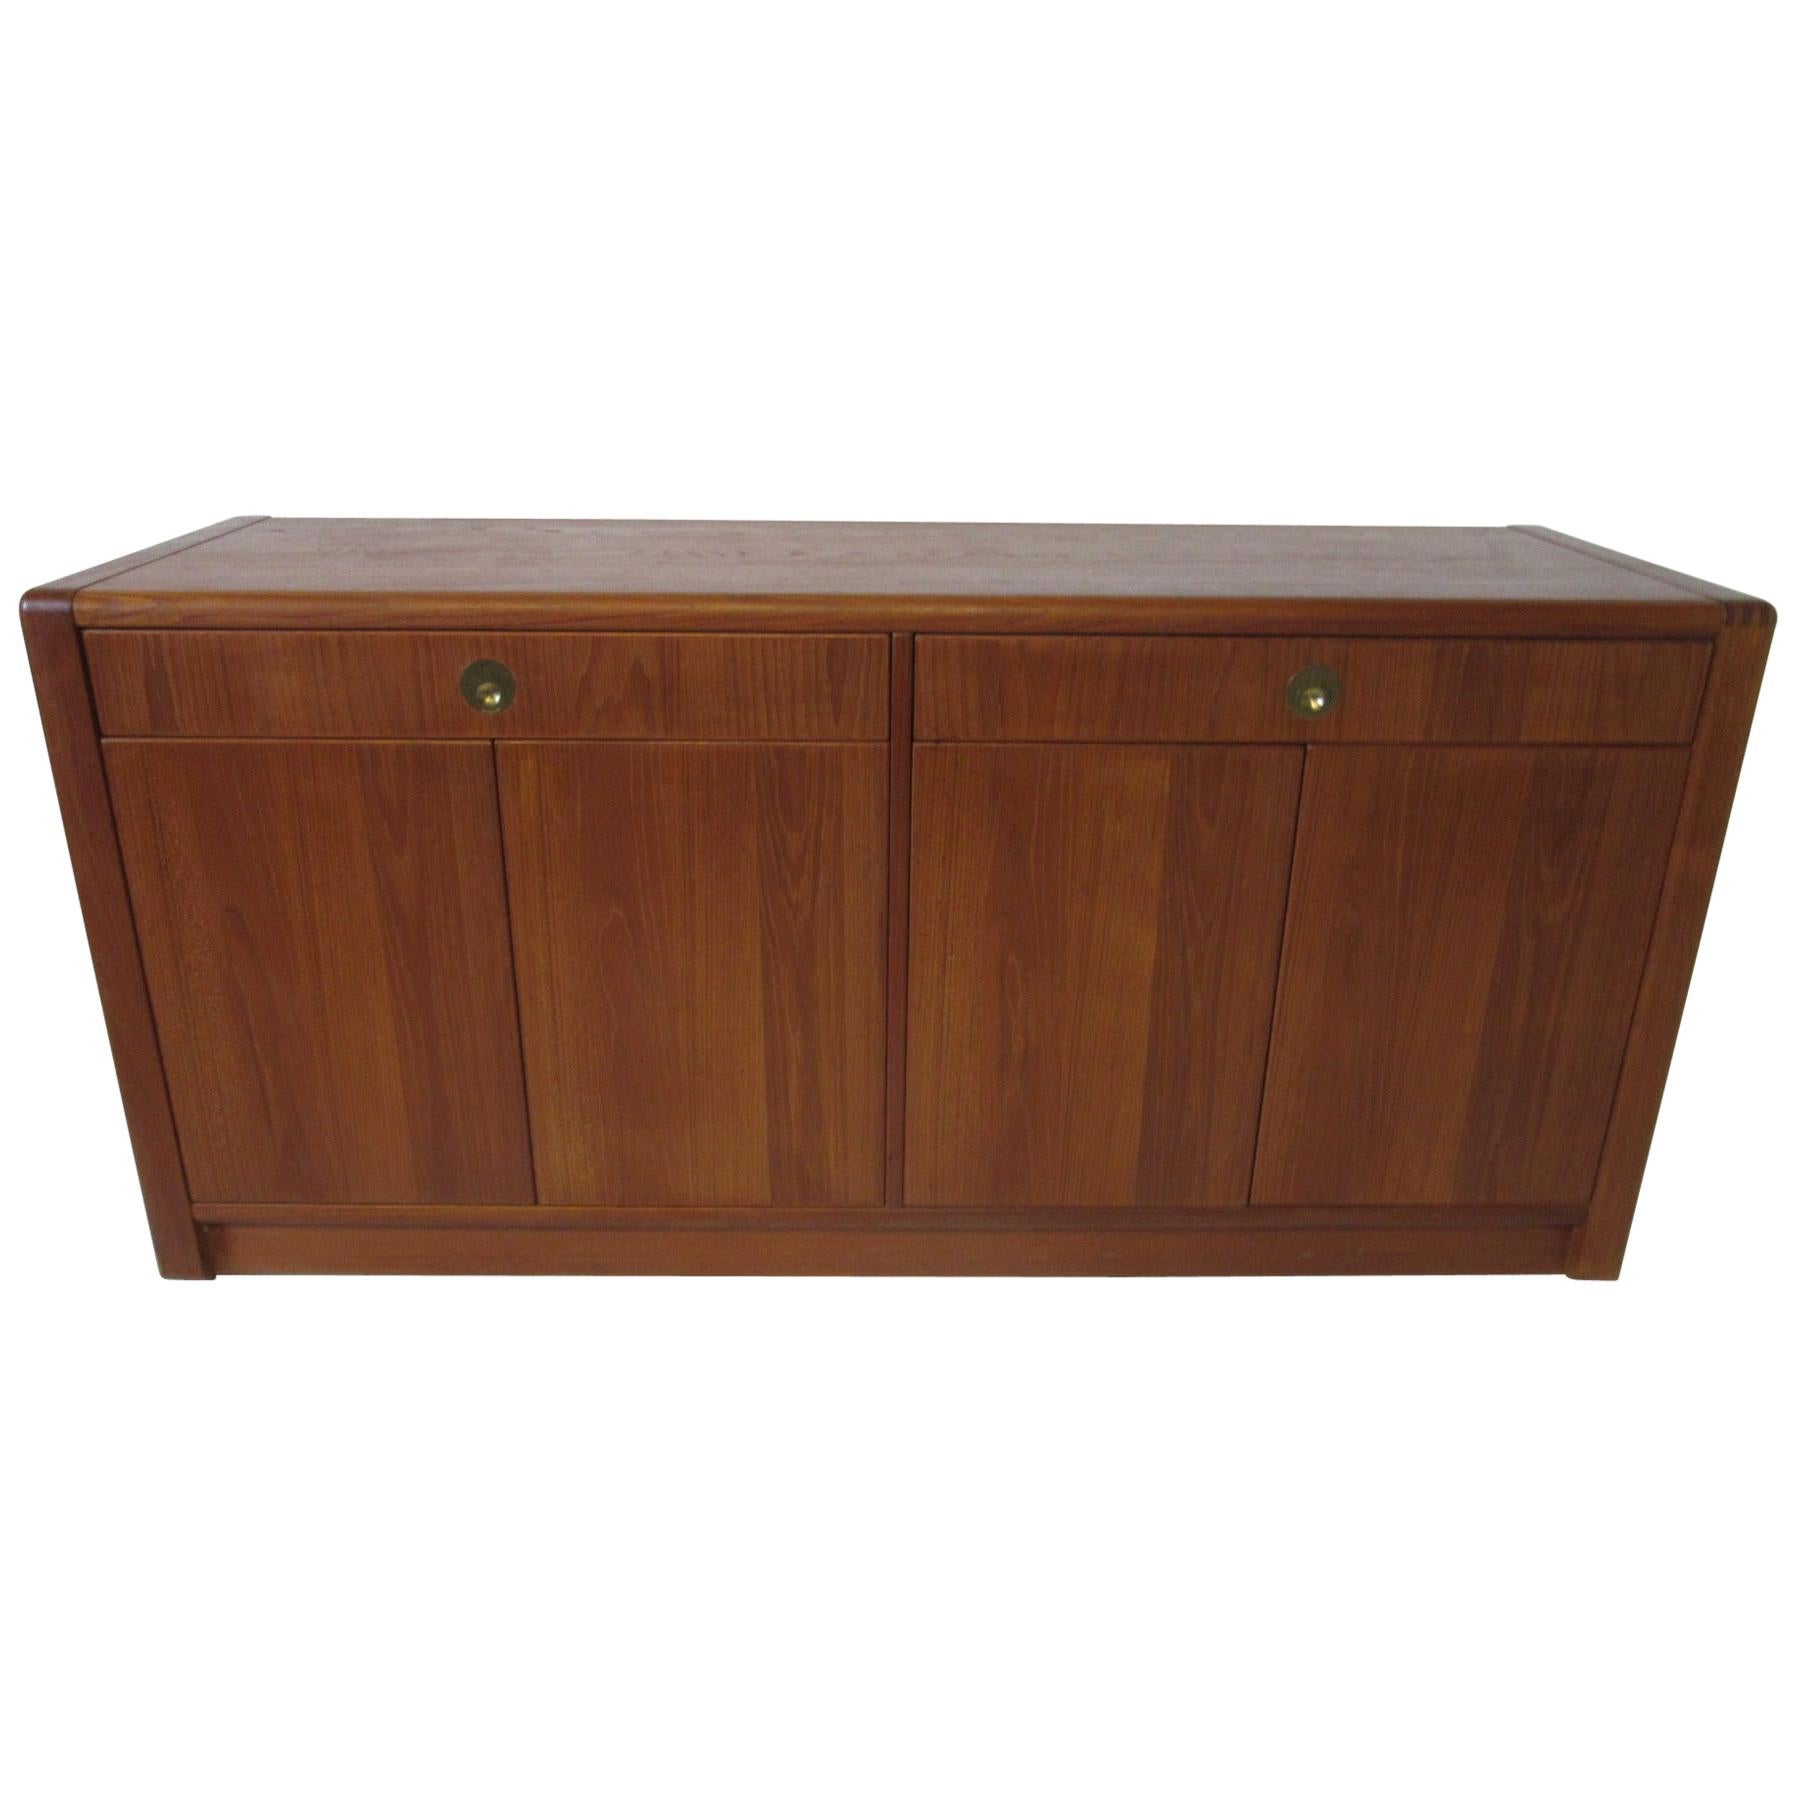 Teak Wood Server / Chest / Credenza in the Danish Style by D- Scan